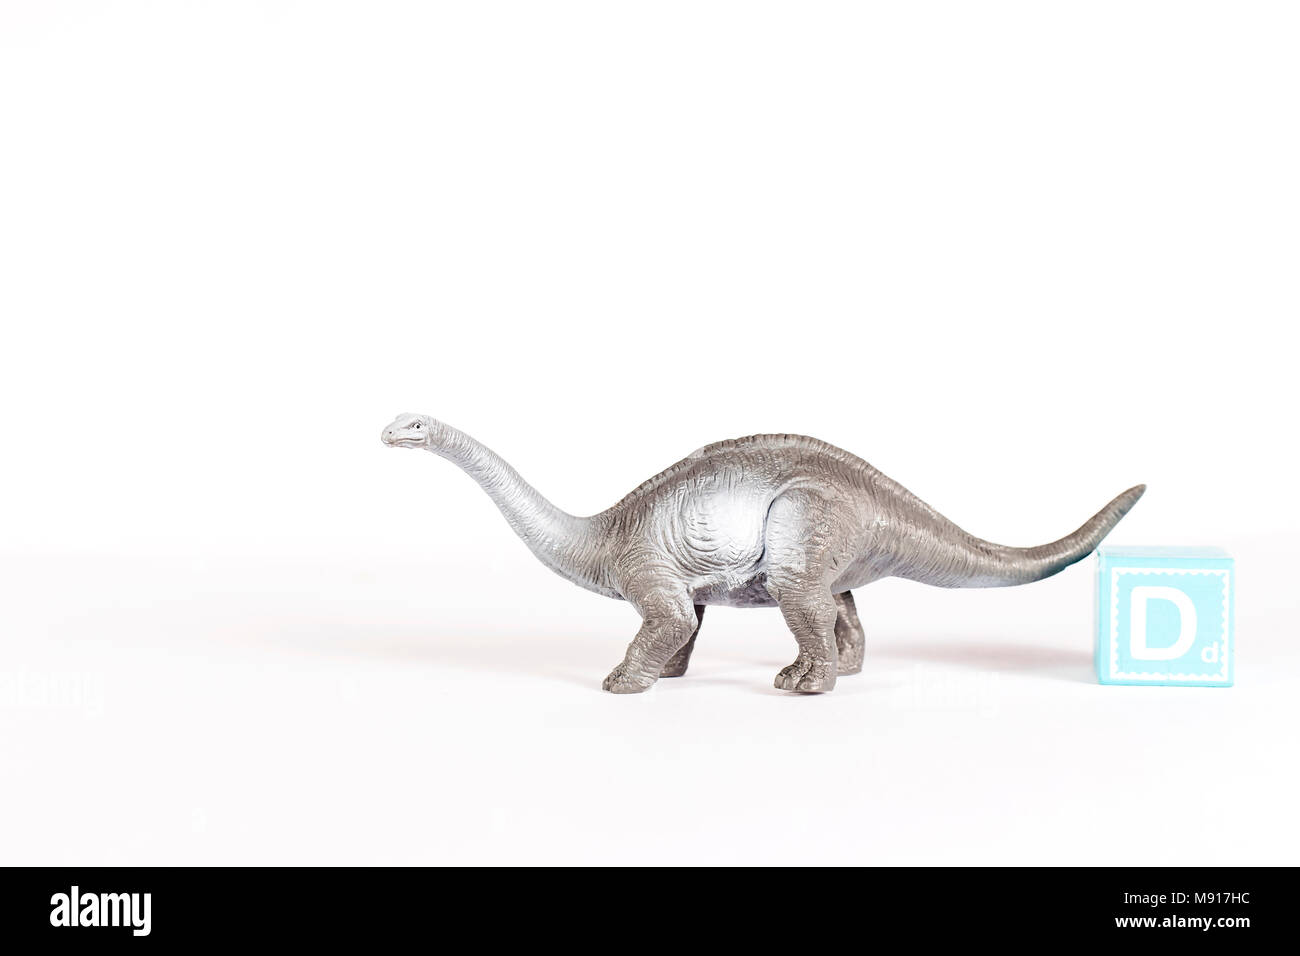 Sauropod walking on the white background with word block. Stock Photo